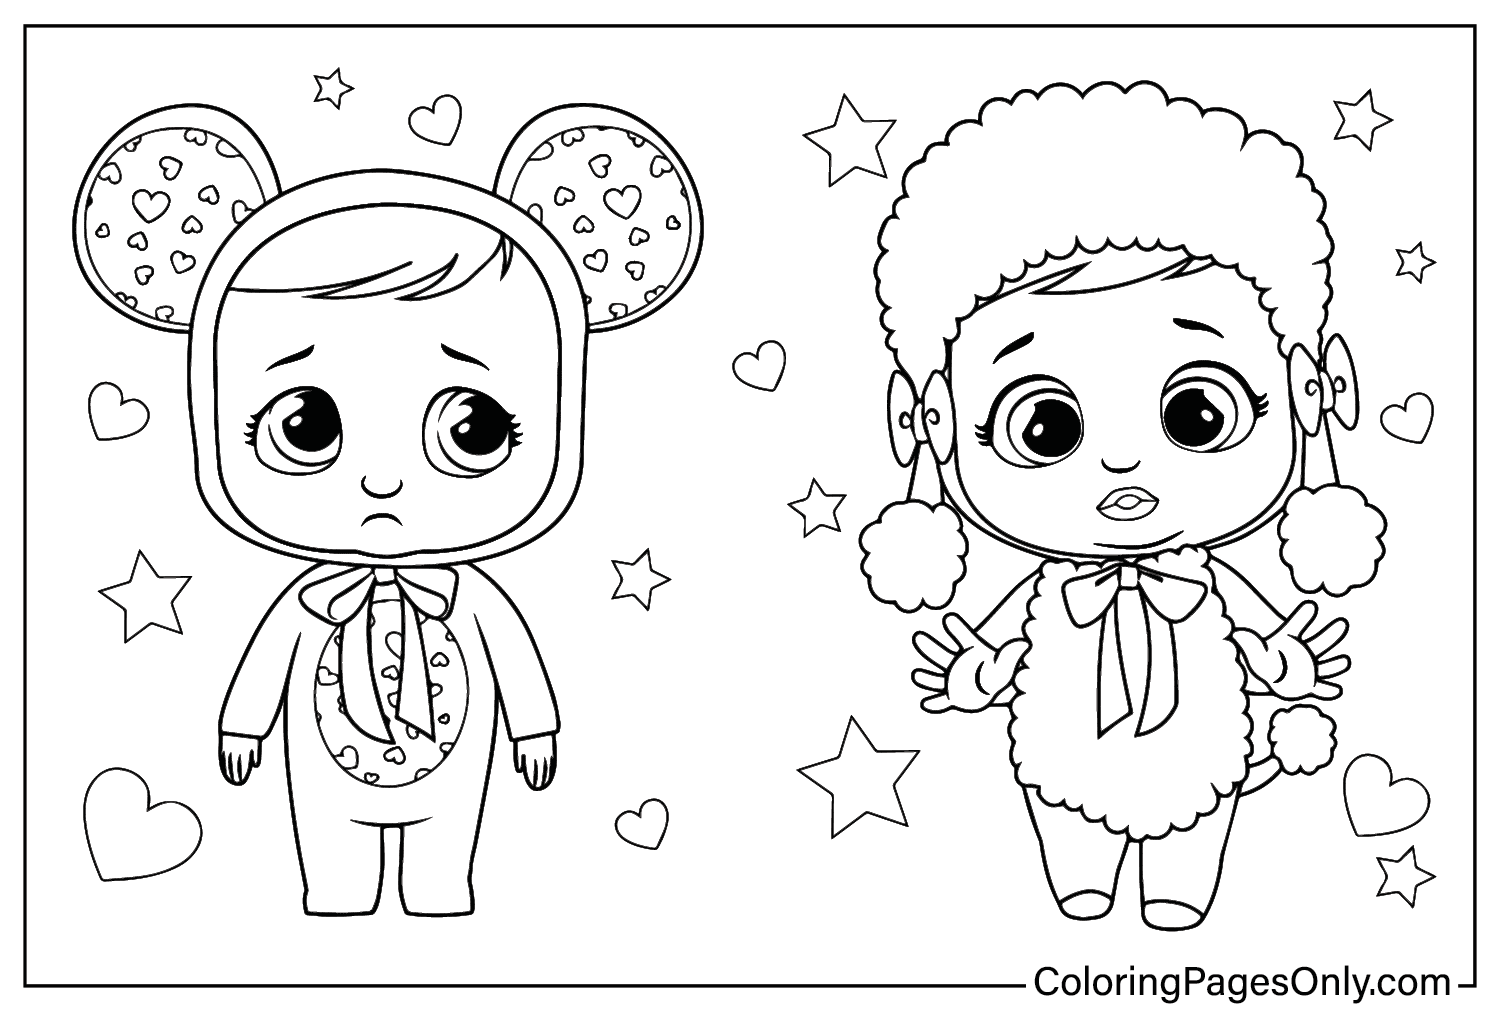 Cry Babies Coloring Page for Adults from Cry Babies